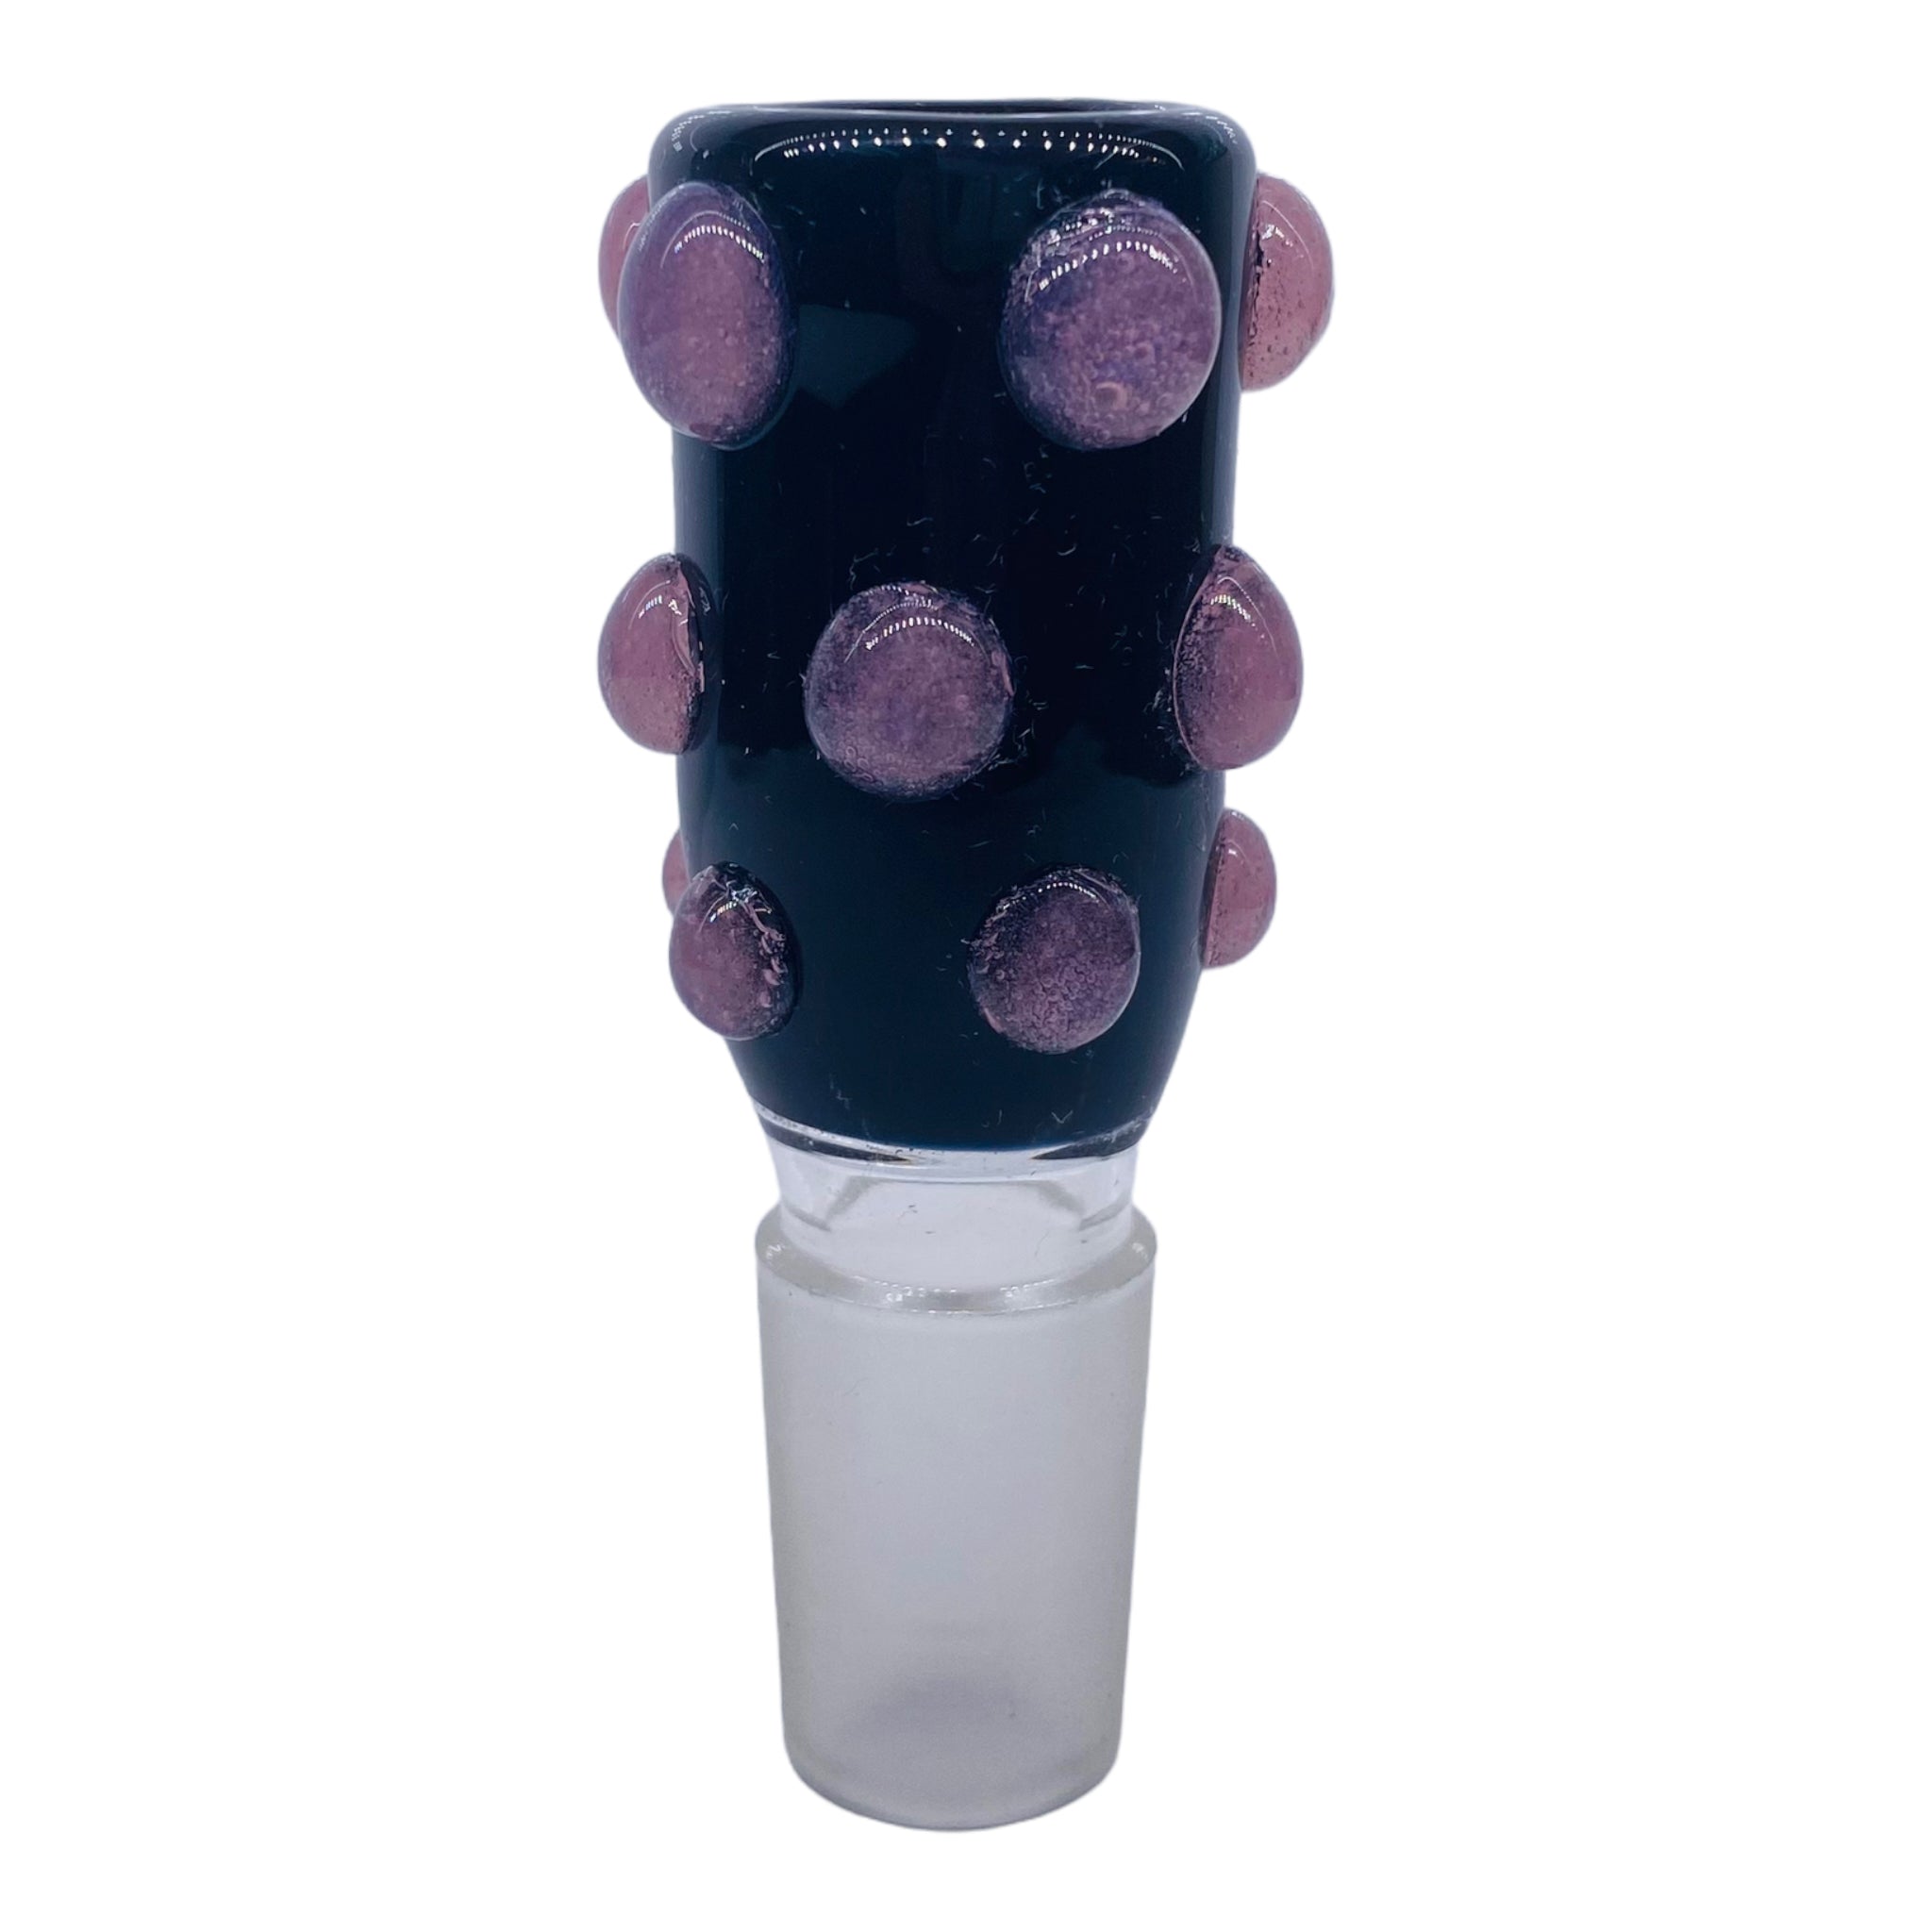 18mm Flower Bowl - Tall Black Bubble With Pink Dots Bong Bowl Piece